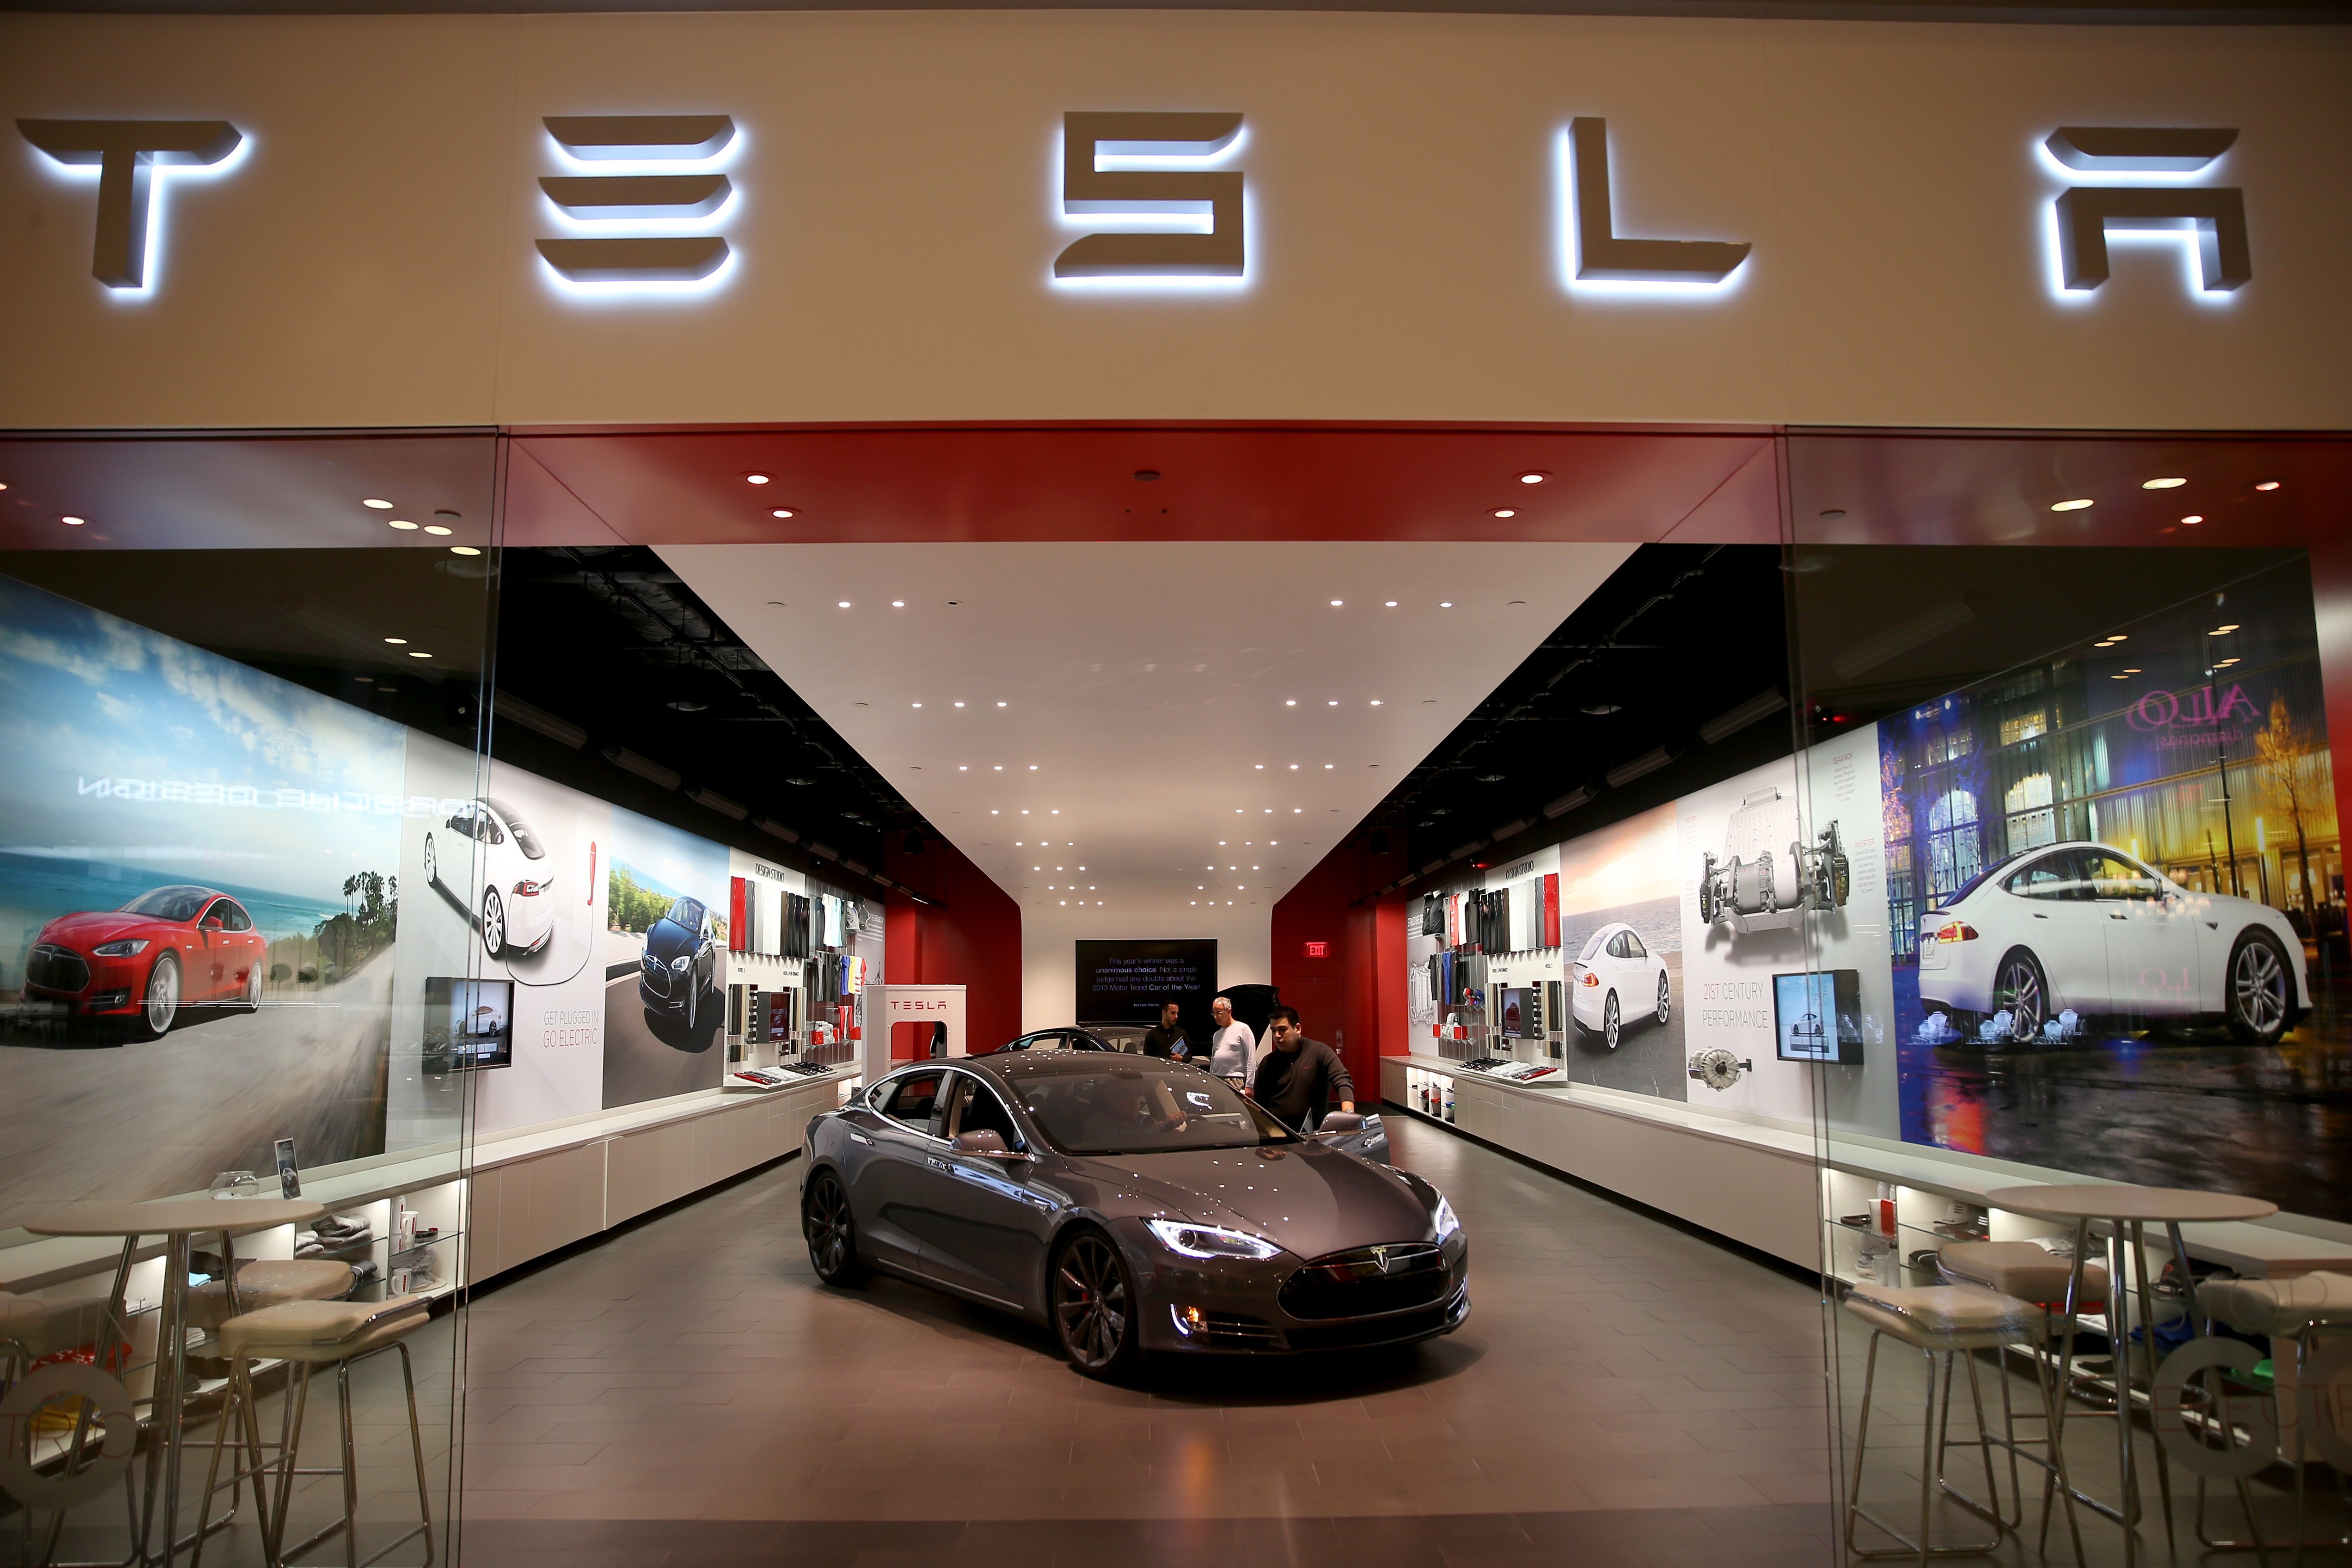 People look at a Tesla Motors vehicle on the showroom floor at the Dadeland Mall on Feb. 19, 2014 in Miami, Florida. (Joe Raedle—Getty Images)